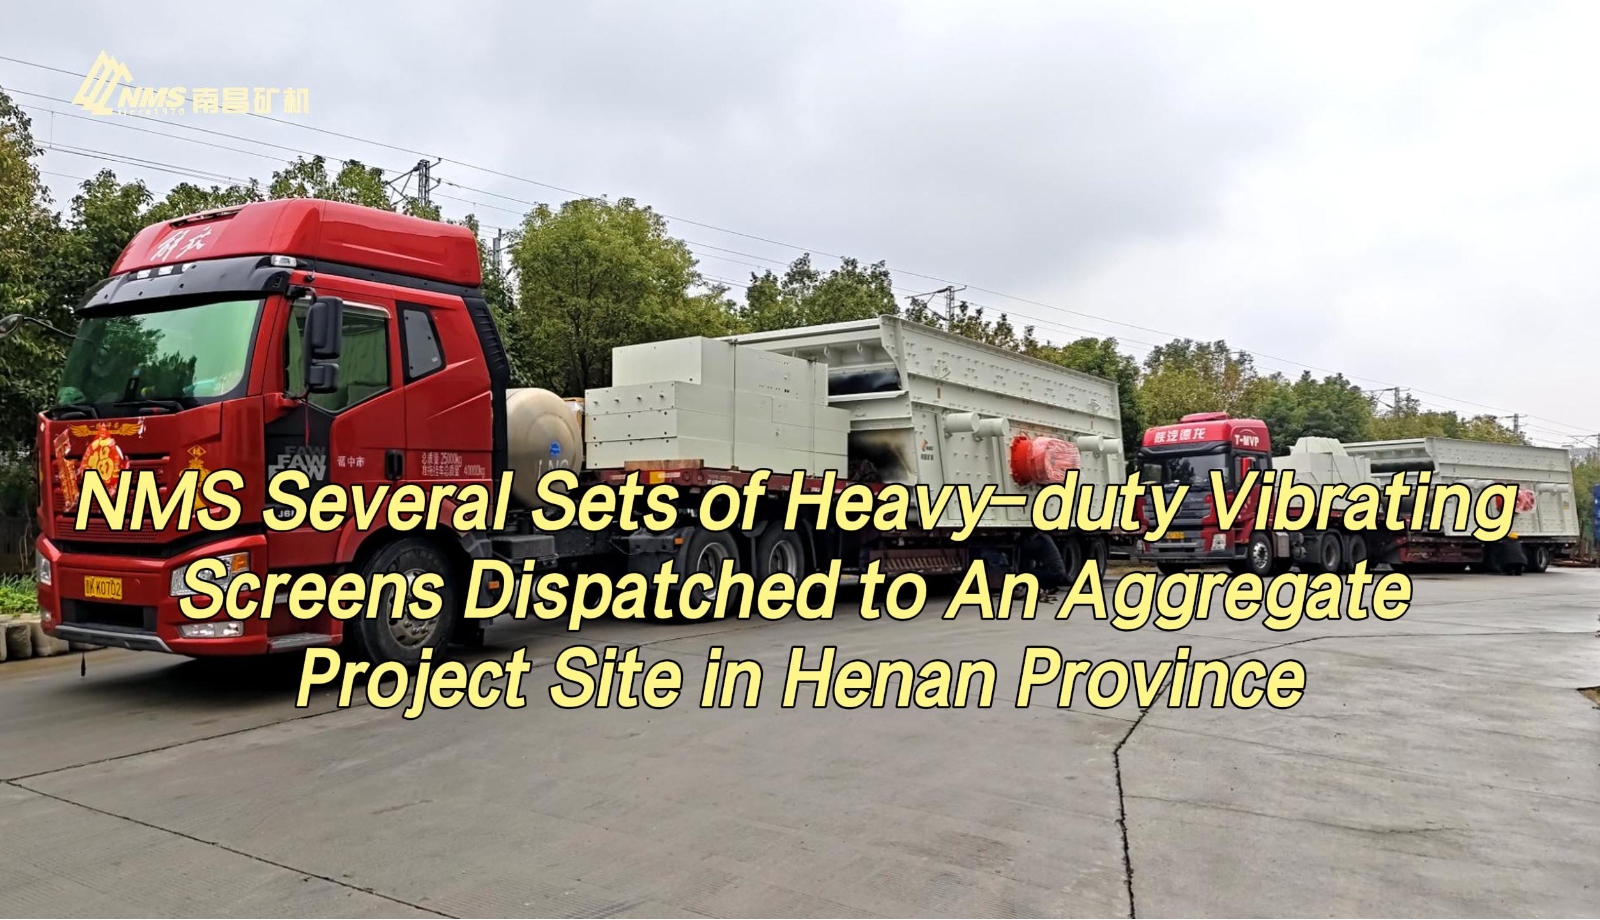 NMS Several Sets of Heavy-duty Vibrating Screens Dispatched to An Aggregate Project Site in Henan Province